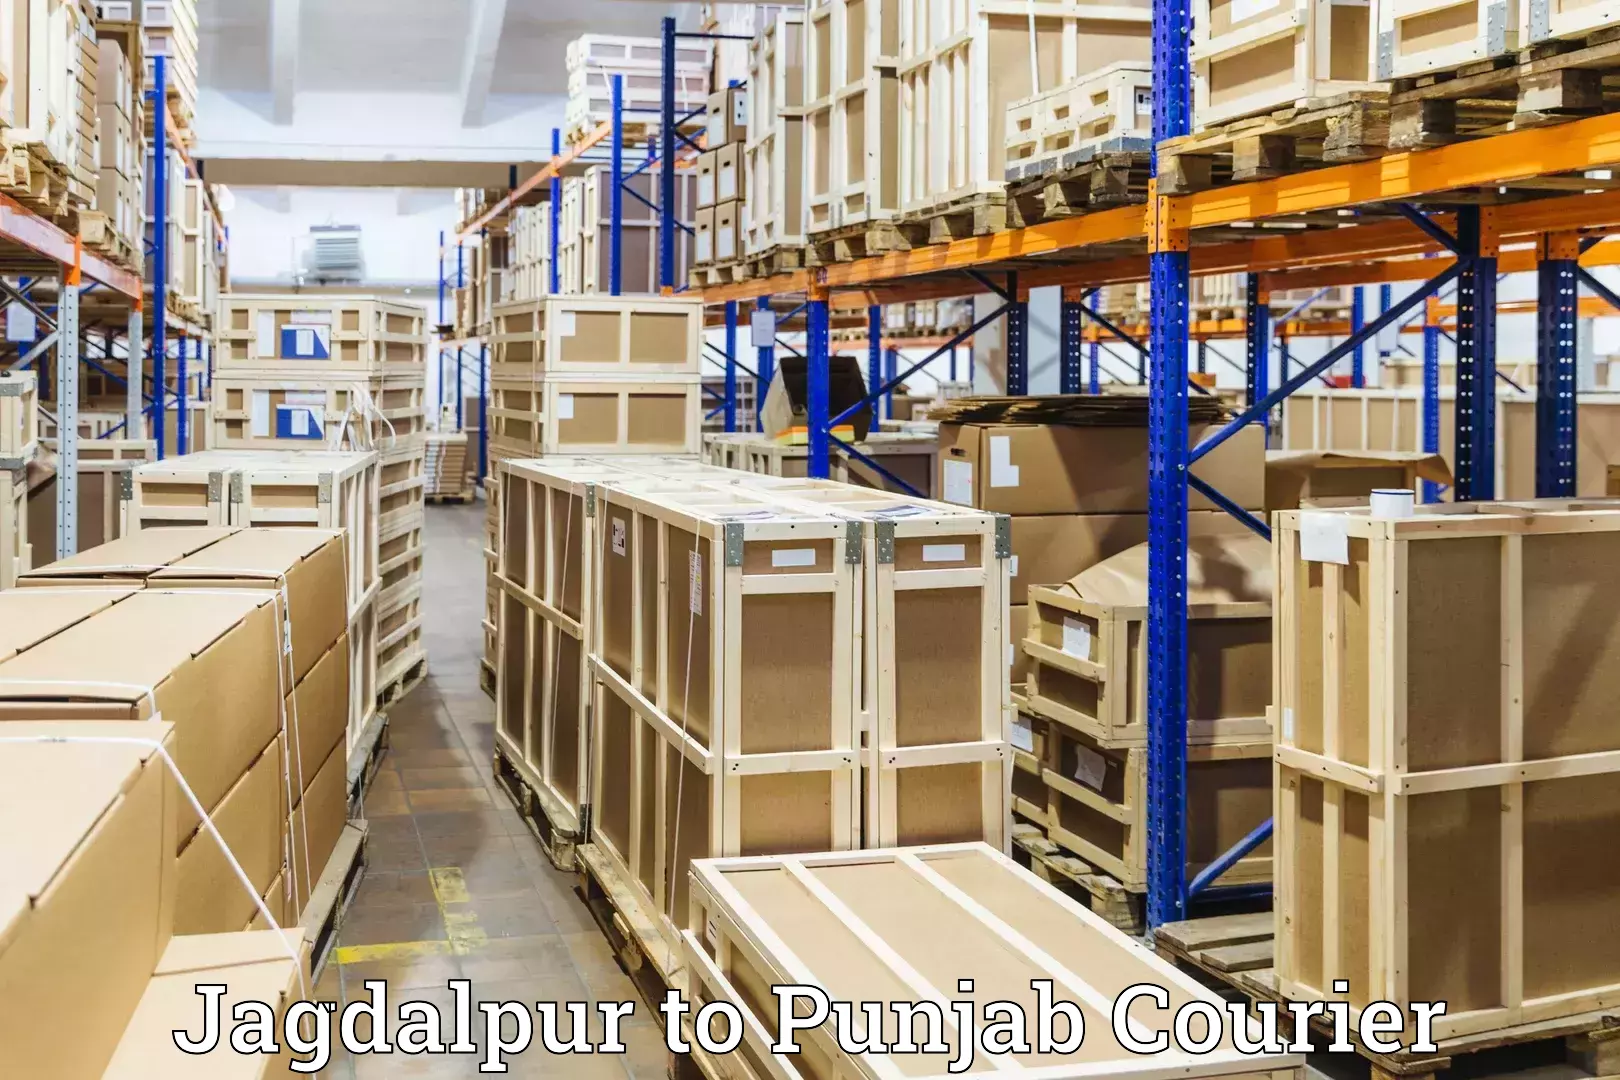 Instant baggage transport quote Jagdalpur to Patiala